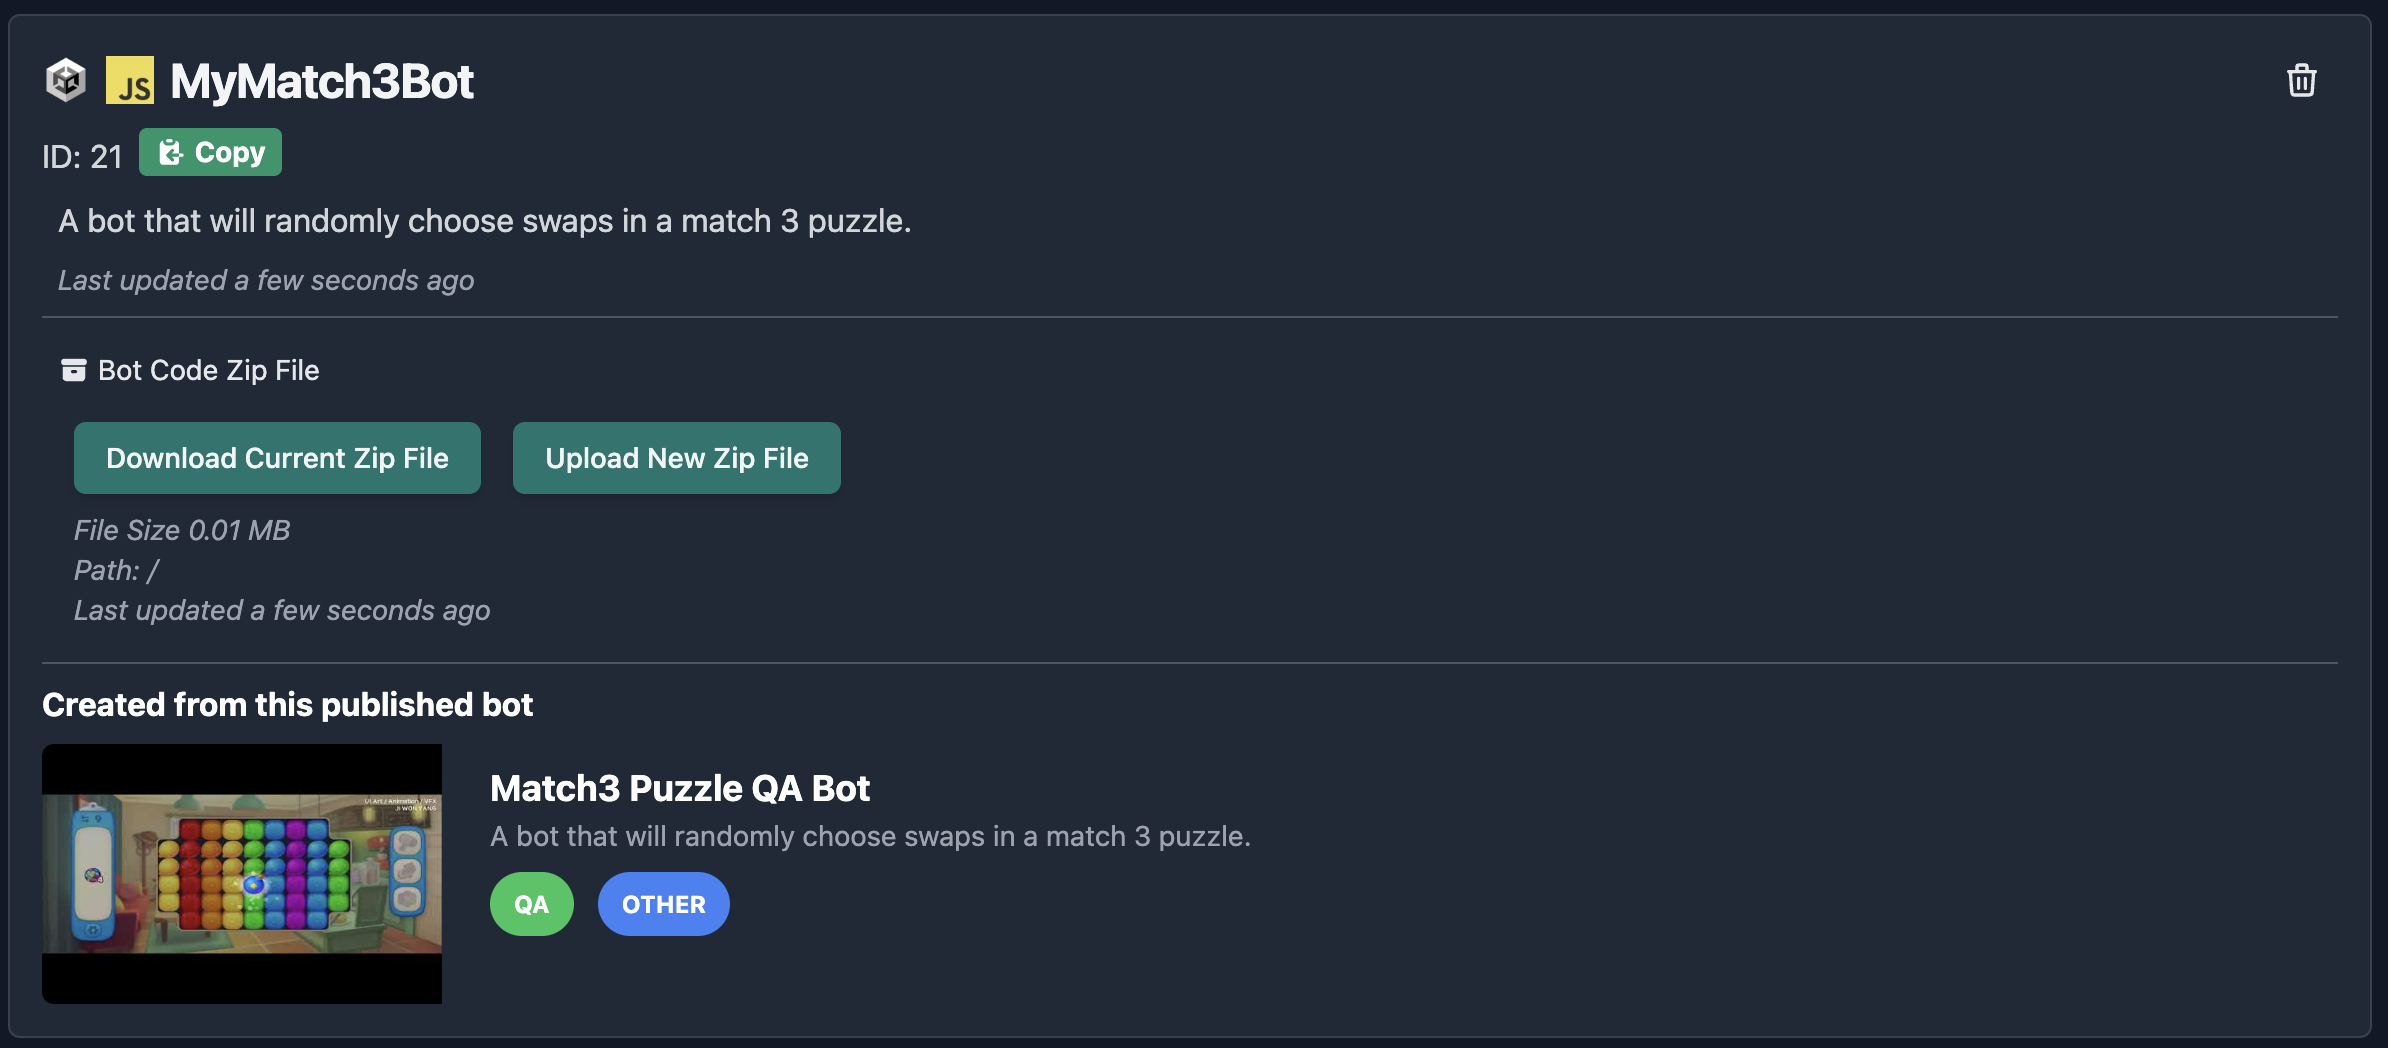 View the new bot